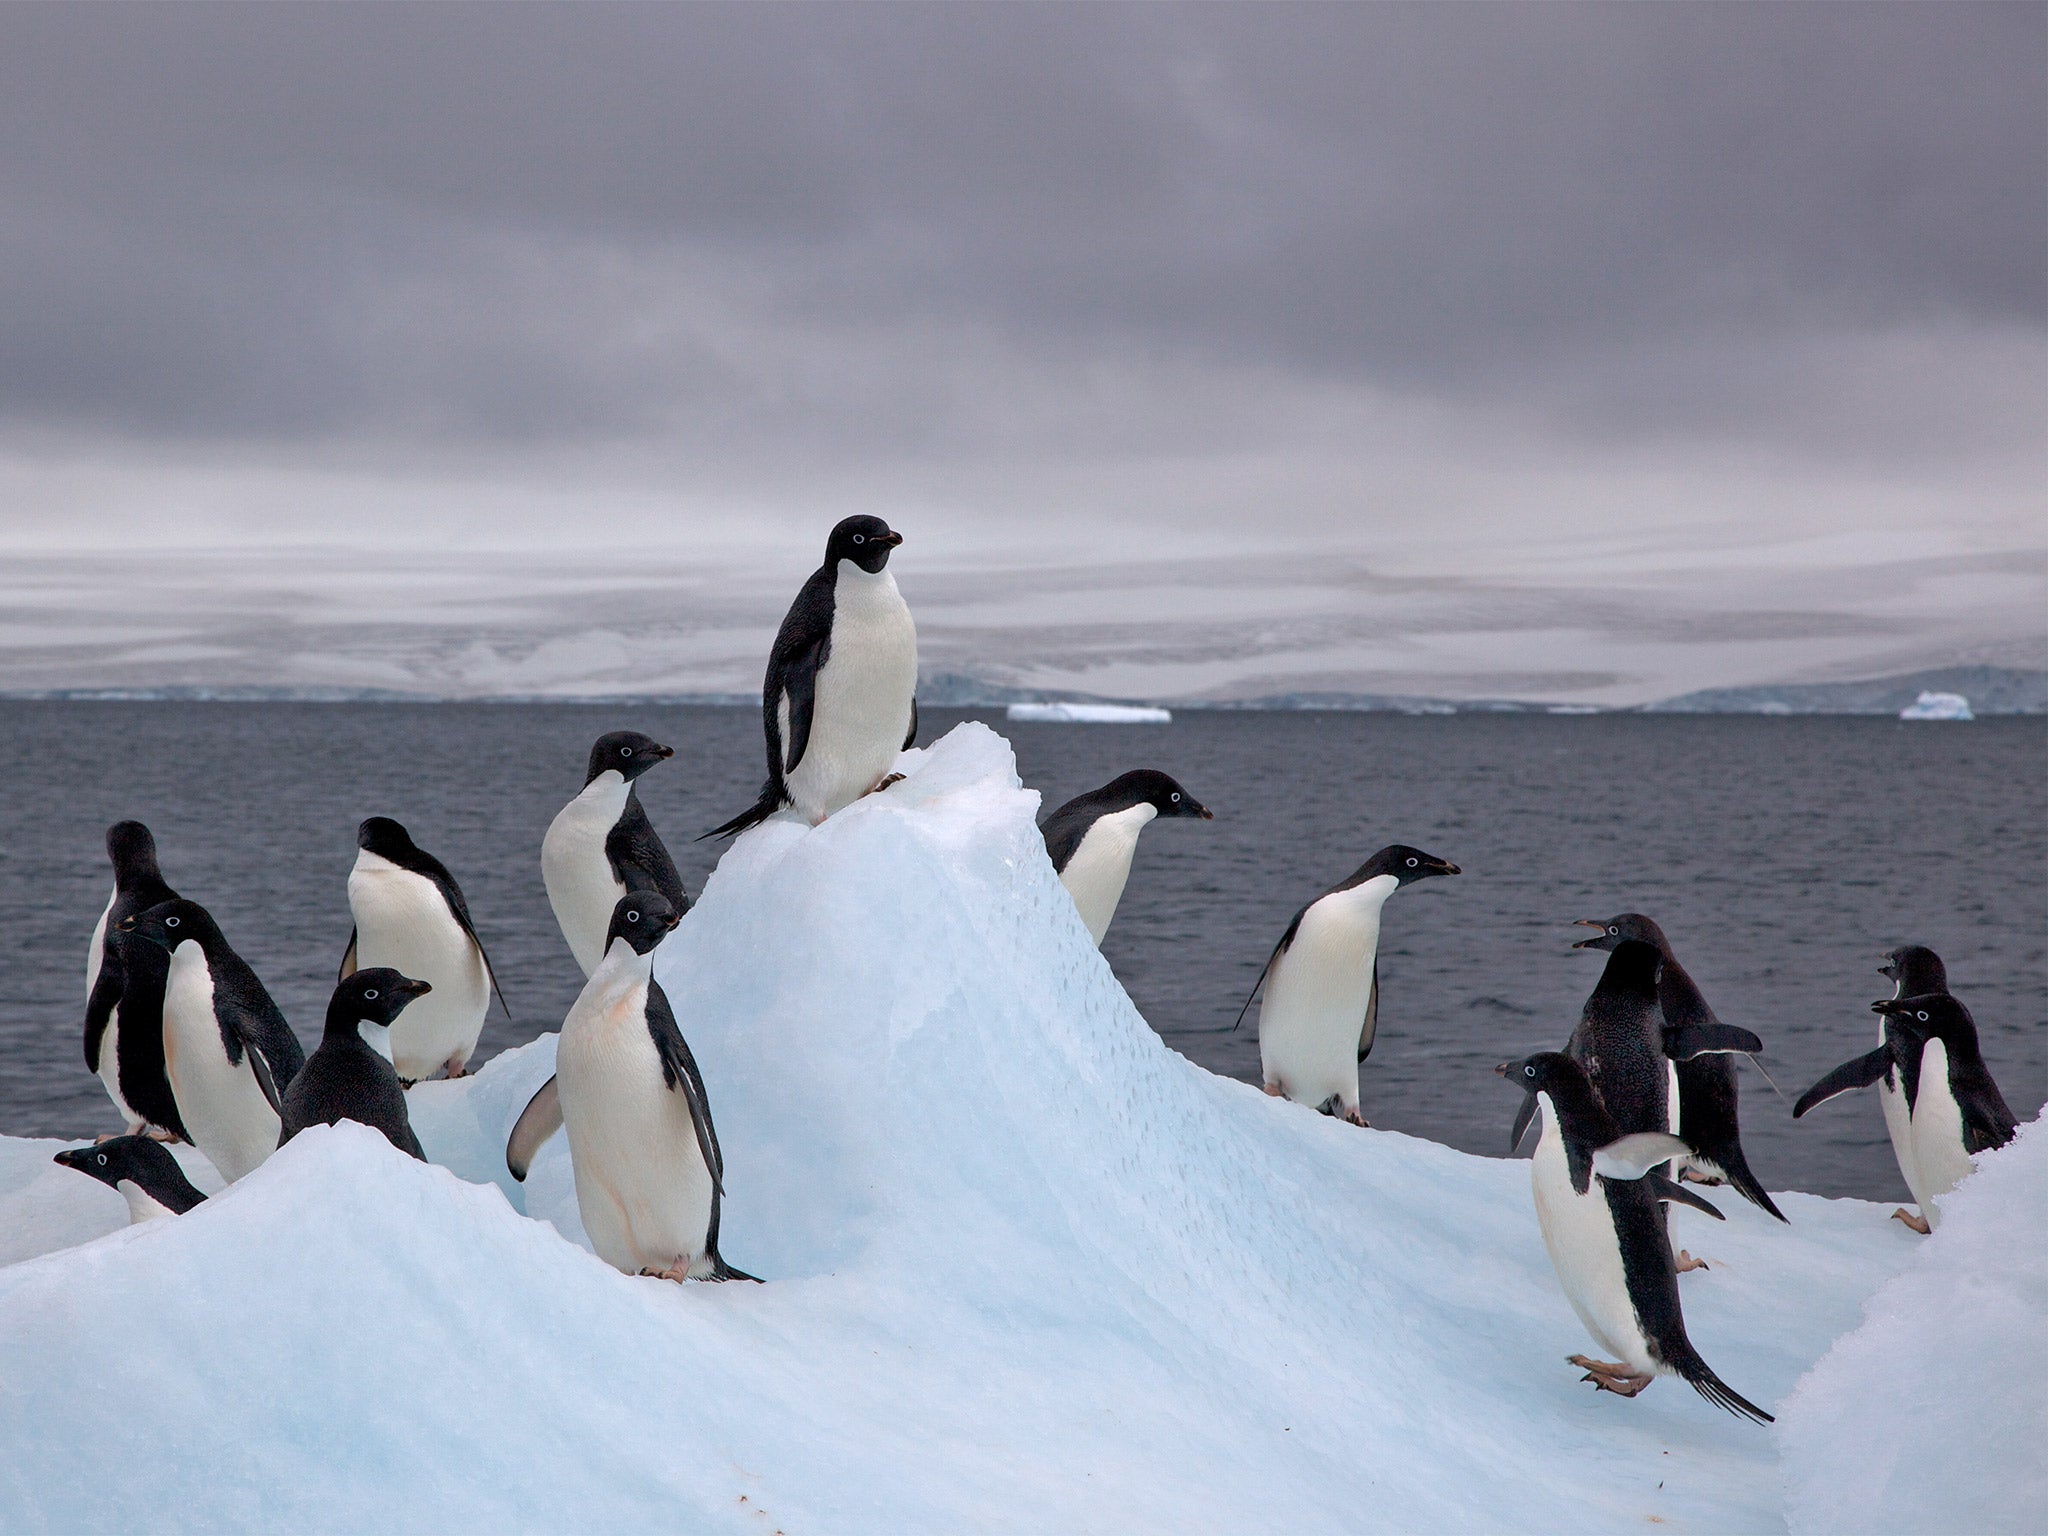 Scientists still know little about how the penguins emigrate between colonies